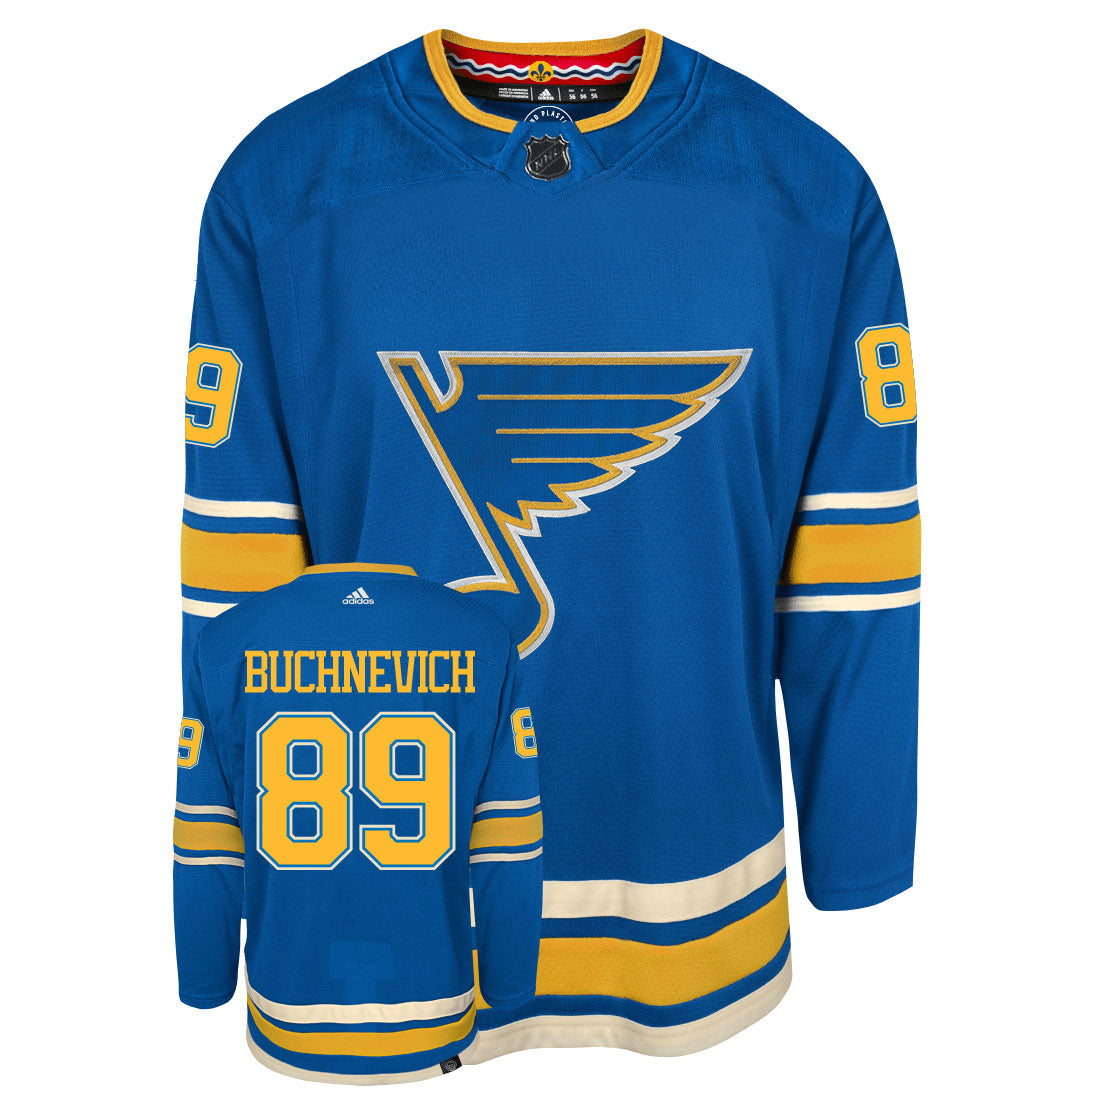 Pavel Buchnevich St Louis Blues Adidas Primegreen Authentic Third Alternate NHL Hockey Jersey - Front/Back View